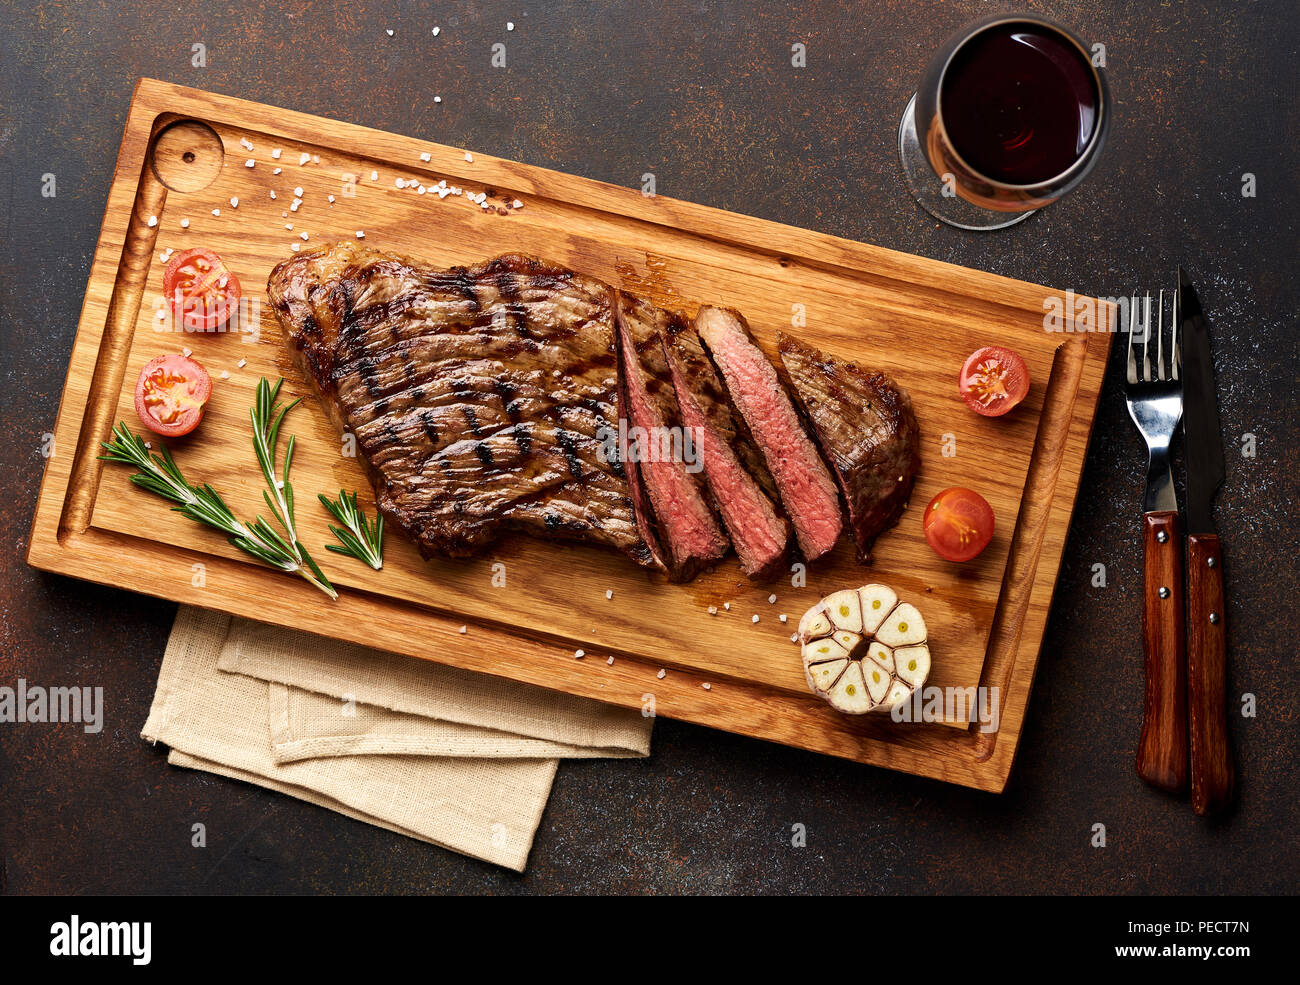 Grilled Black Angus Steak and a glass of red wine with tomatoes, rosemary on meat cutting board. Stock Photo